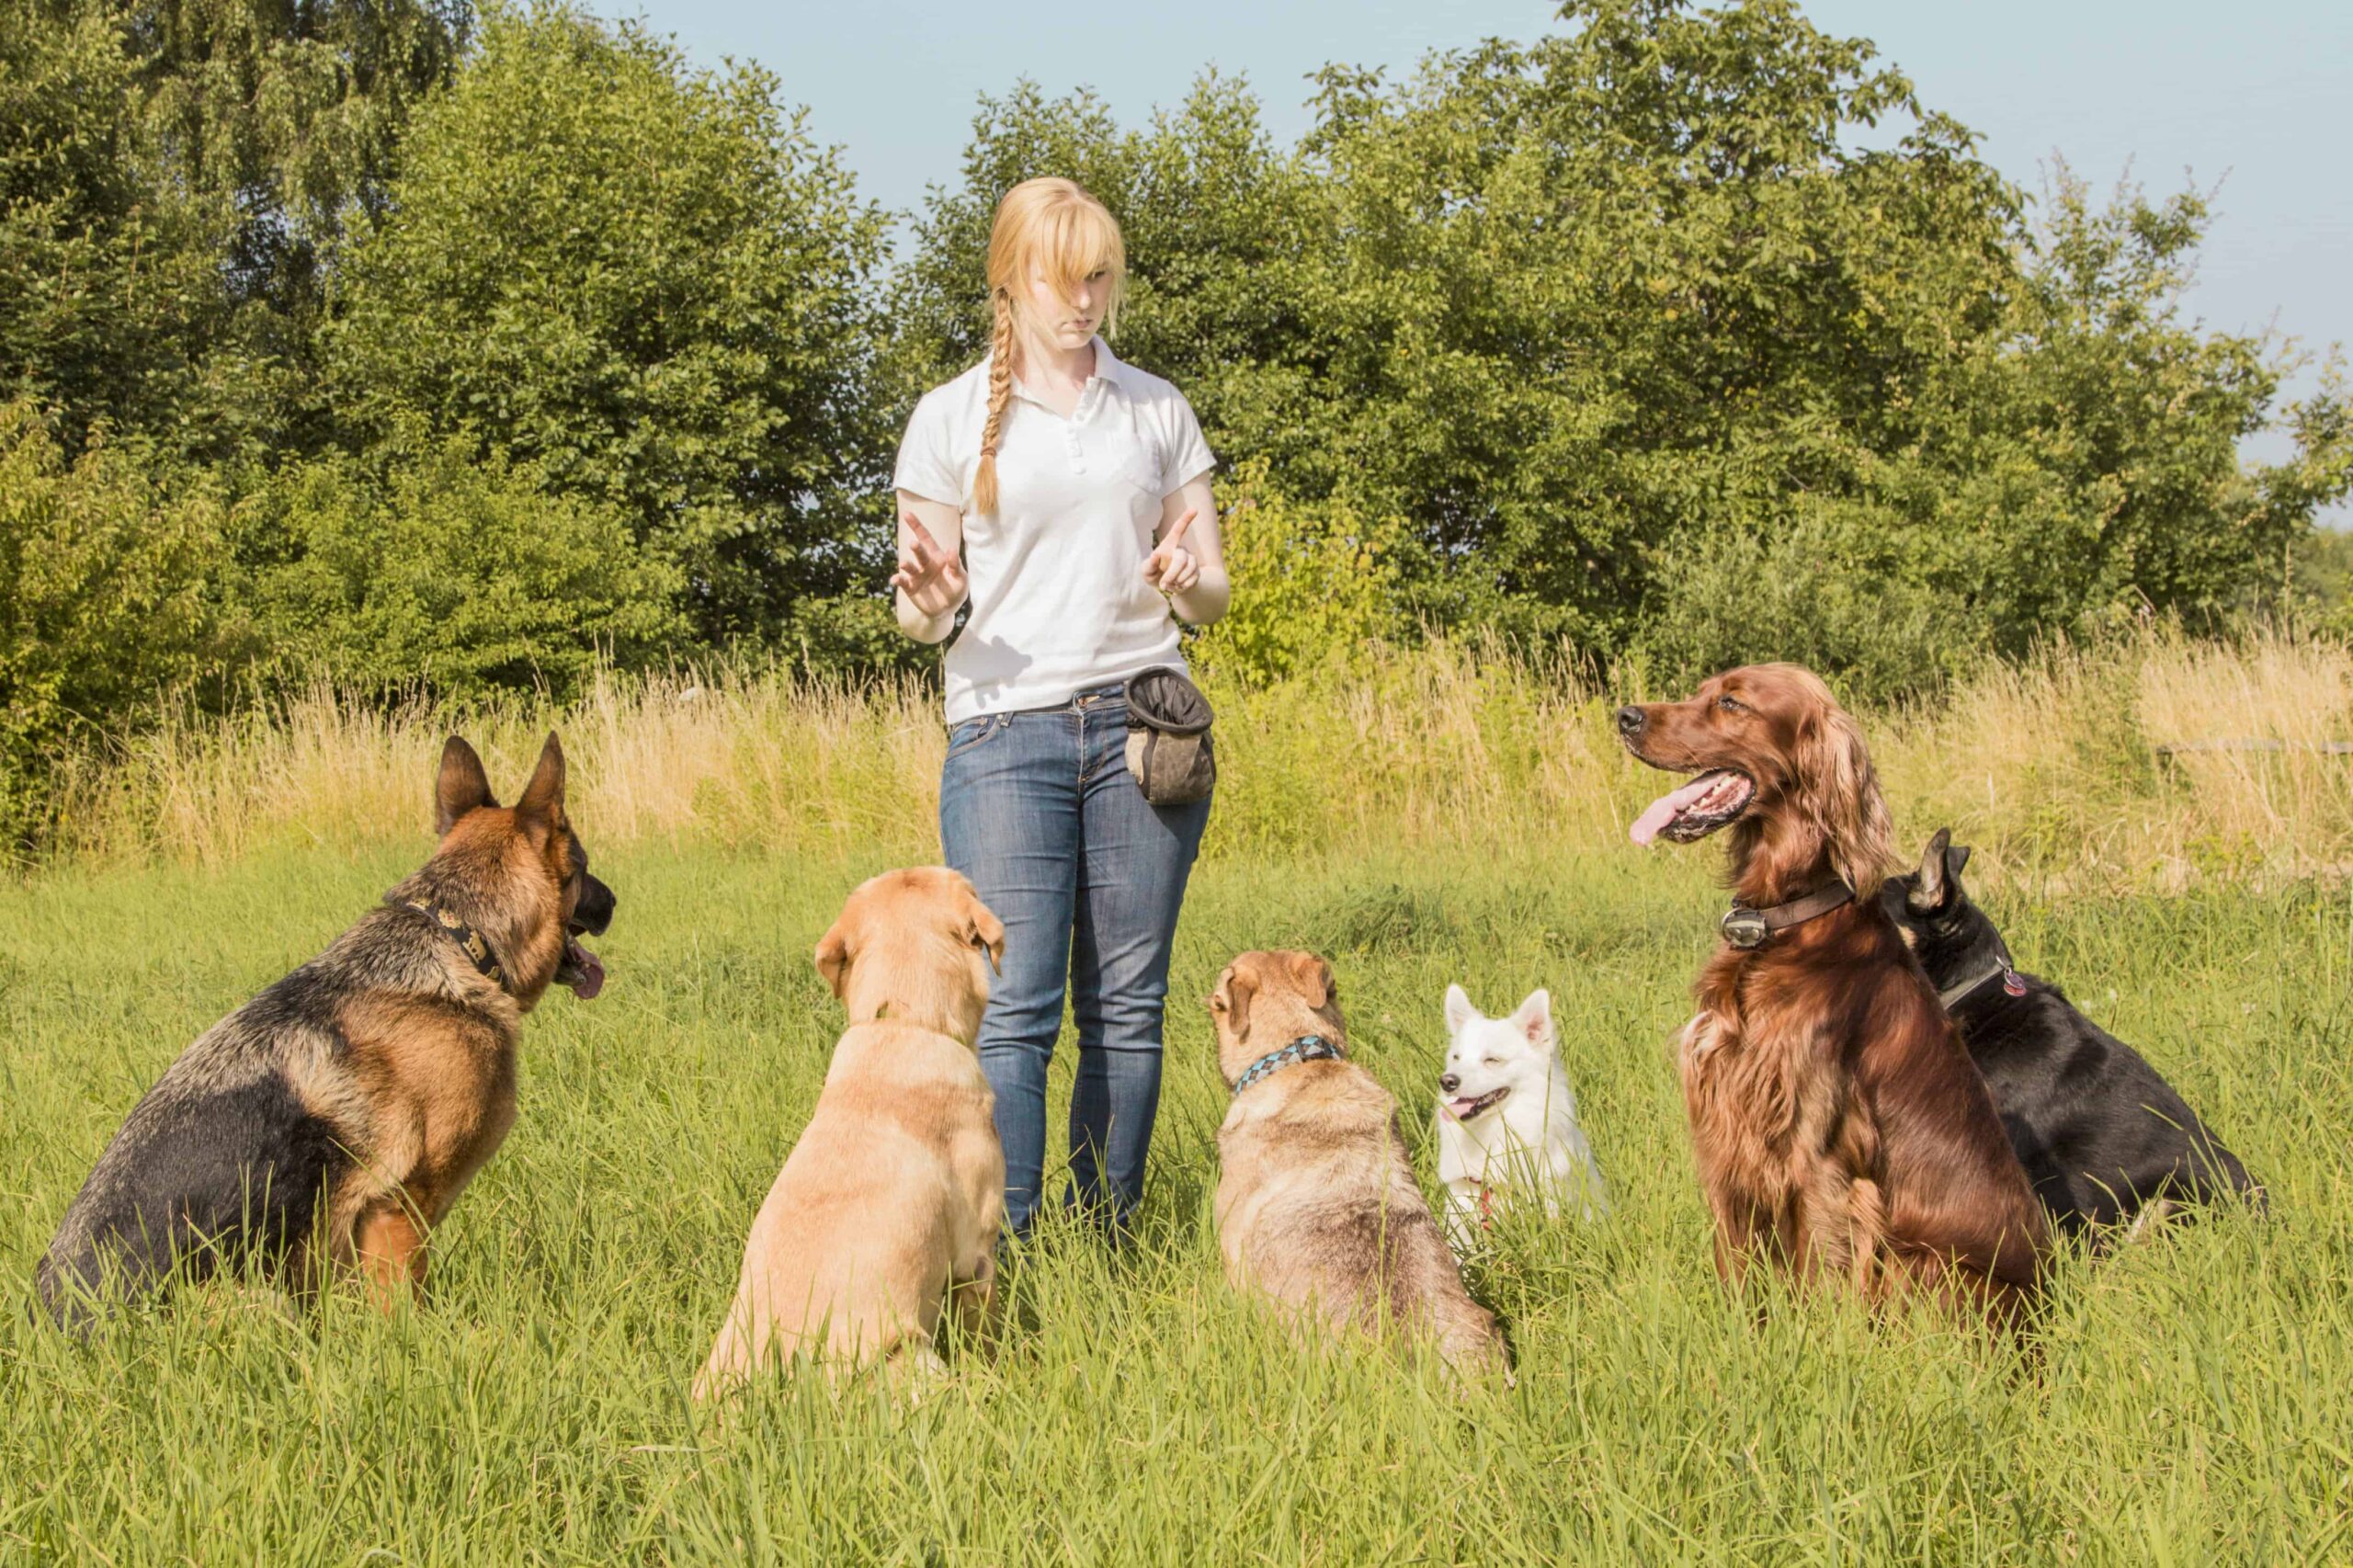 How Much Do Dog Trainers Make? - The Academy of Pet Careers